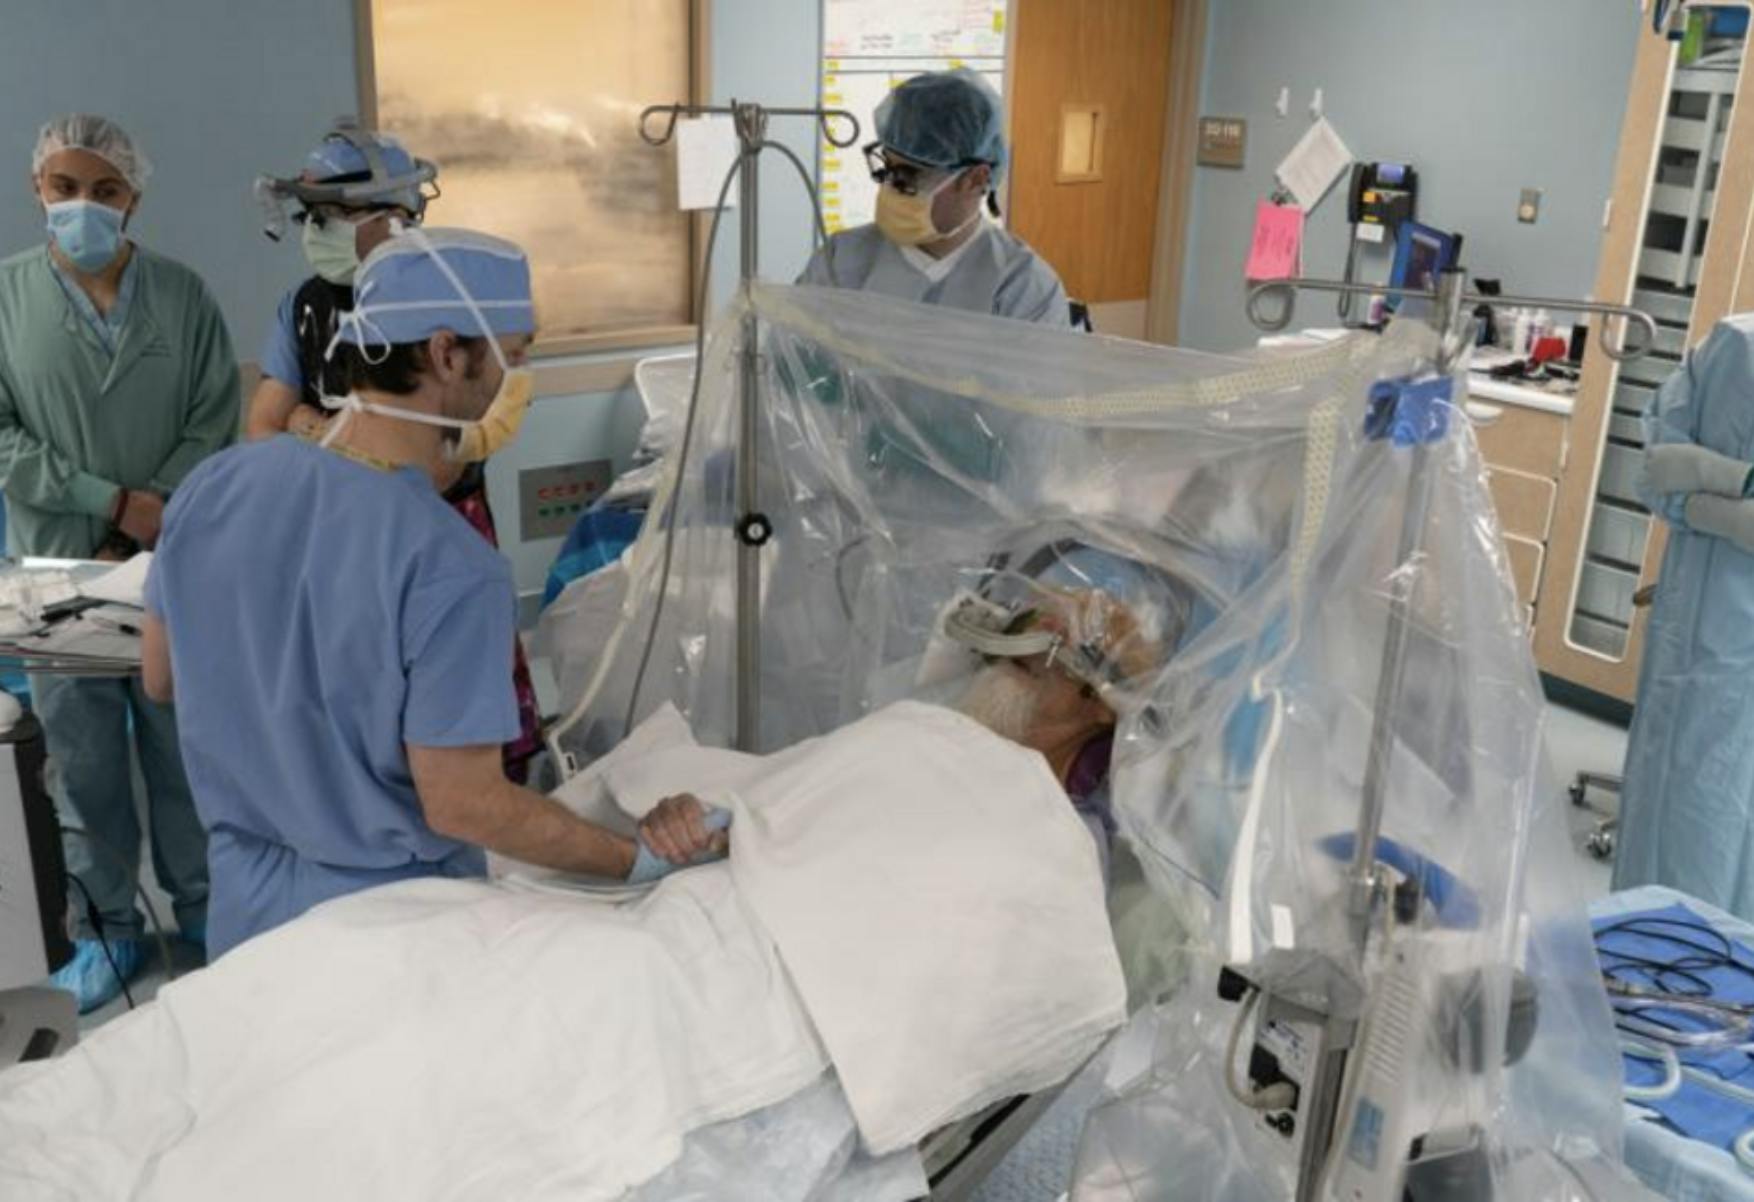 Image of surgeons prepping a patient on a gurney for surgery. Related to 3D printing and healthcare, veterans benefits, veteran care, 3D printing prosthetics.